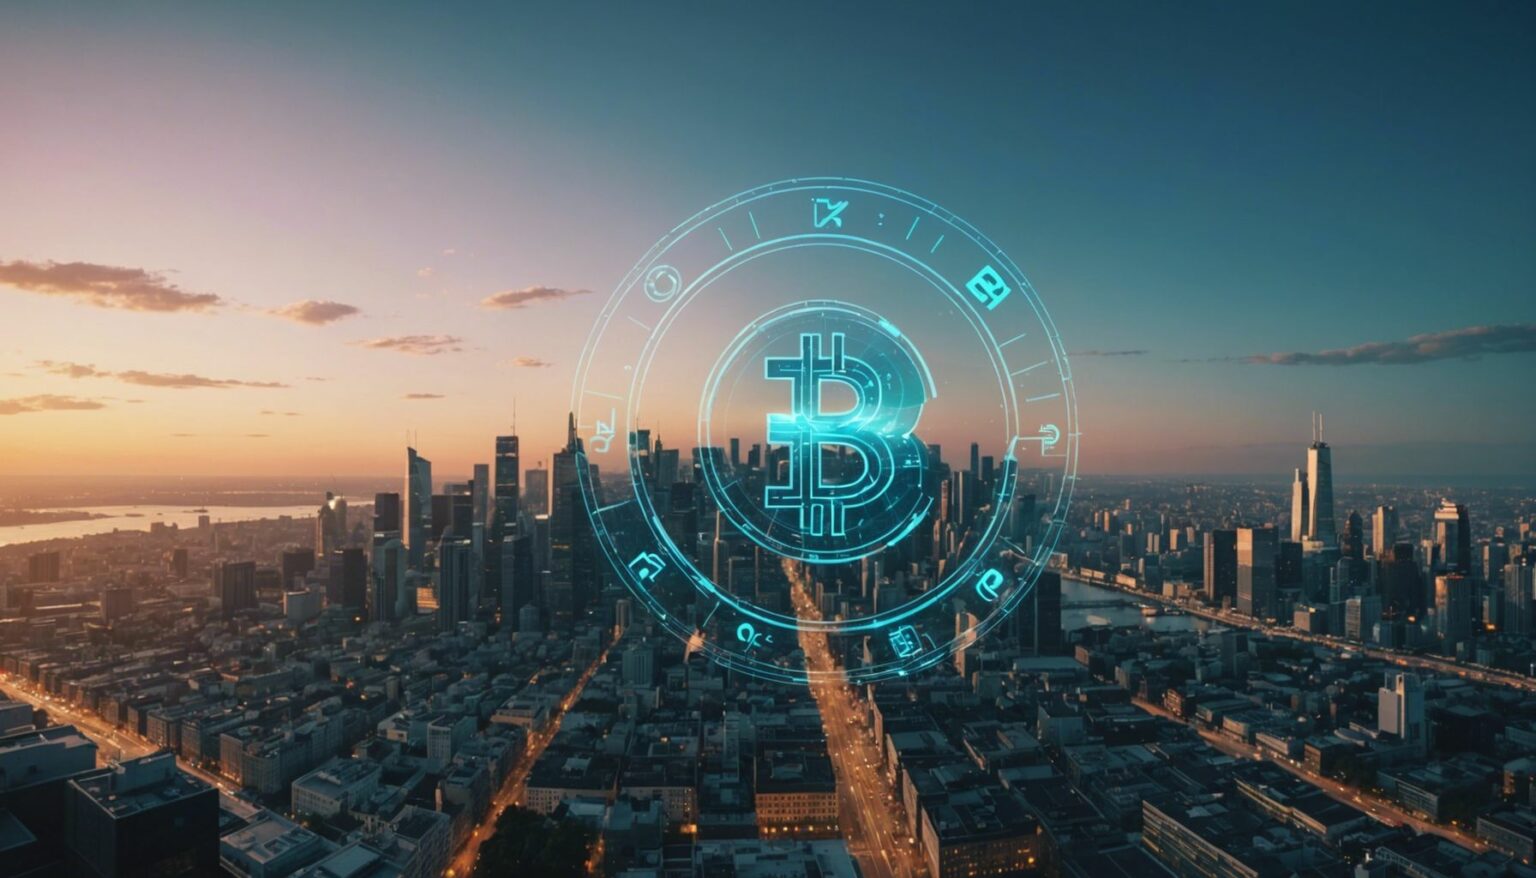 Futuristic city with digital currency symbols, highlighting upcoming crypto projects to watch in 2023.